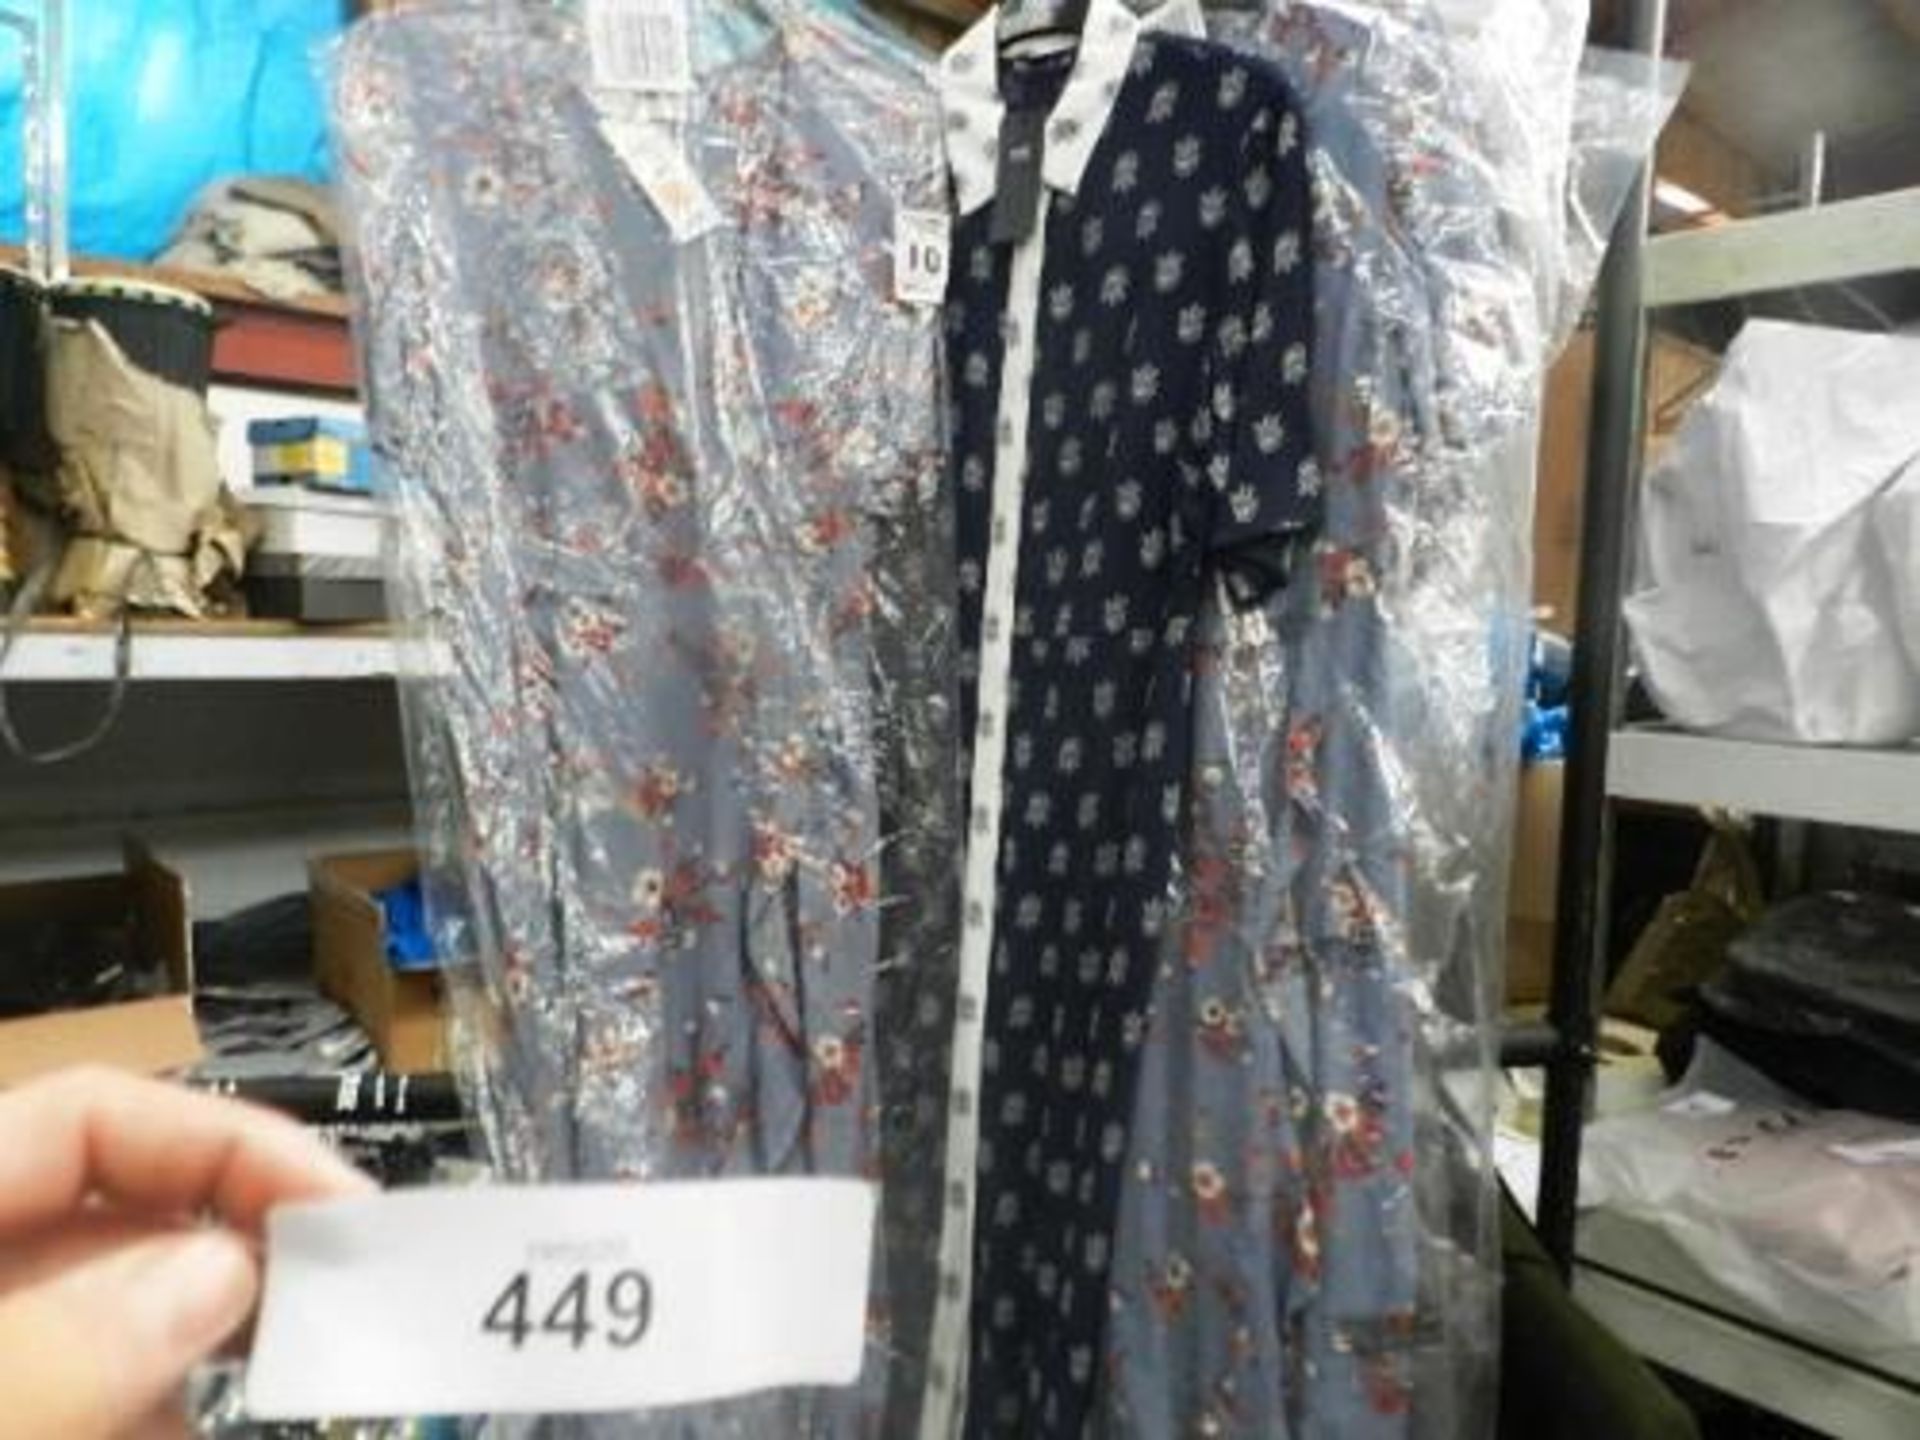 4 x M&S summer dresses, floral design, size 10's and 12 - New (c/rail)